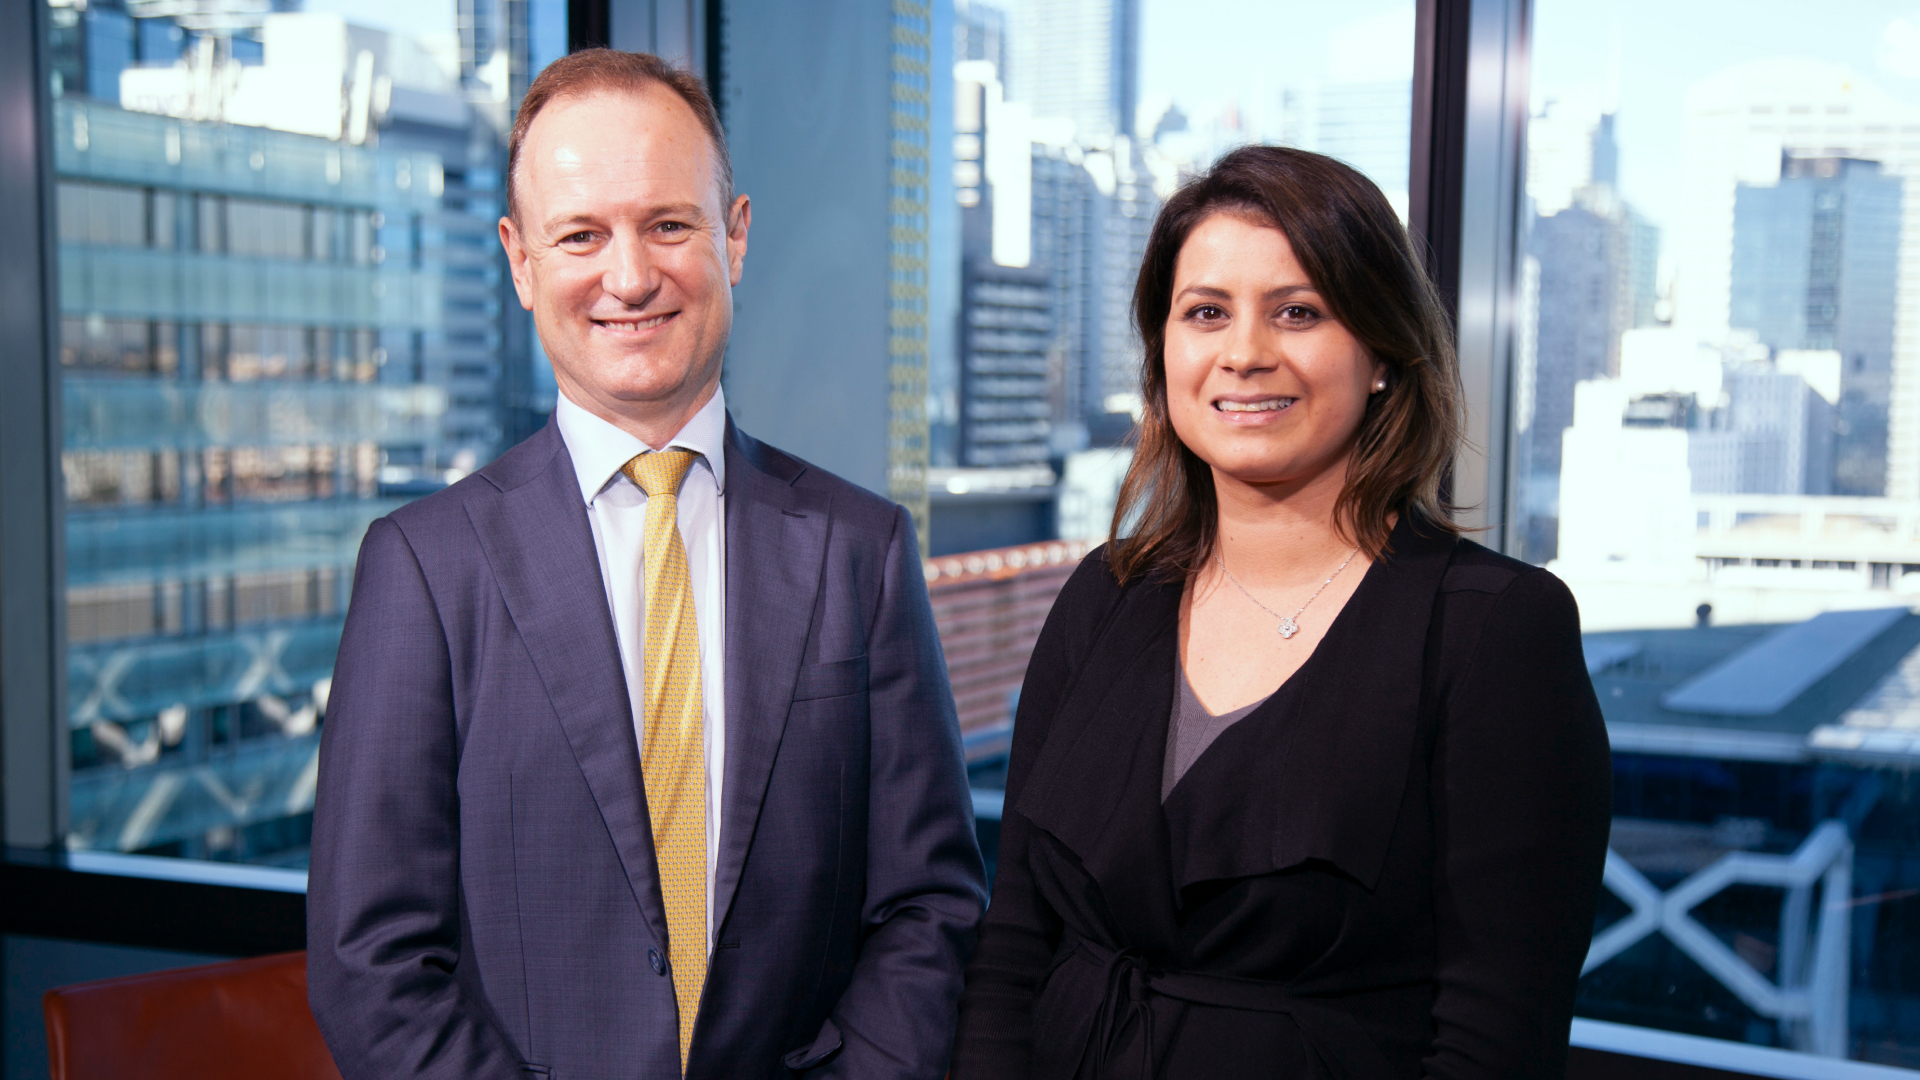 Image: Stephen Cabot, UBS Global Wealth Management and Alexandra Kalceff, Wilsons Advisory